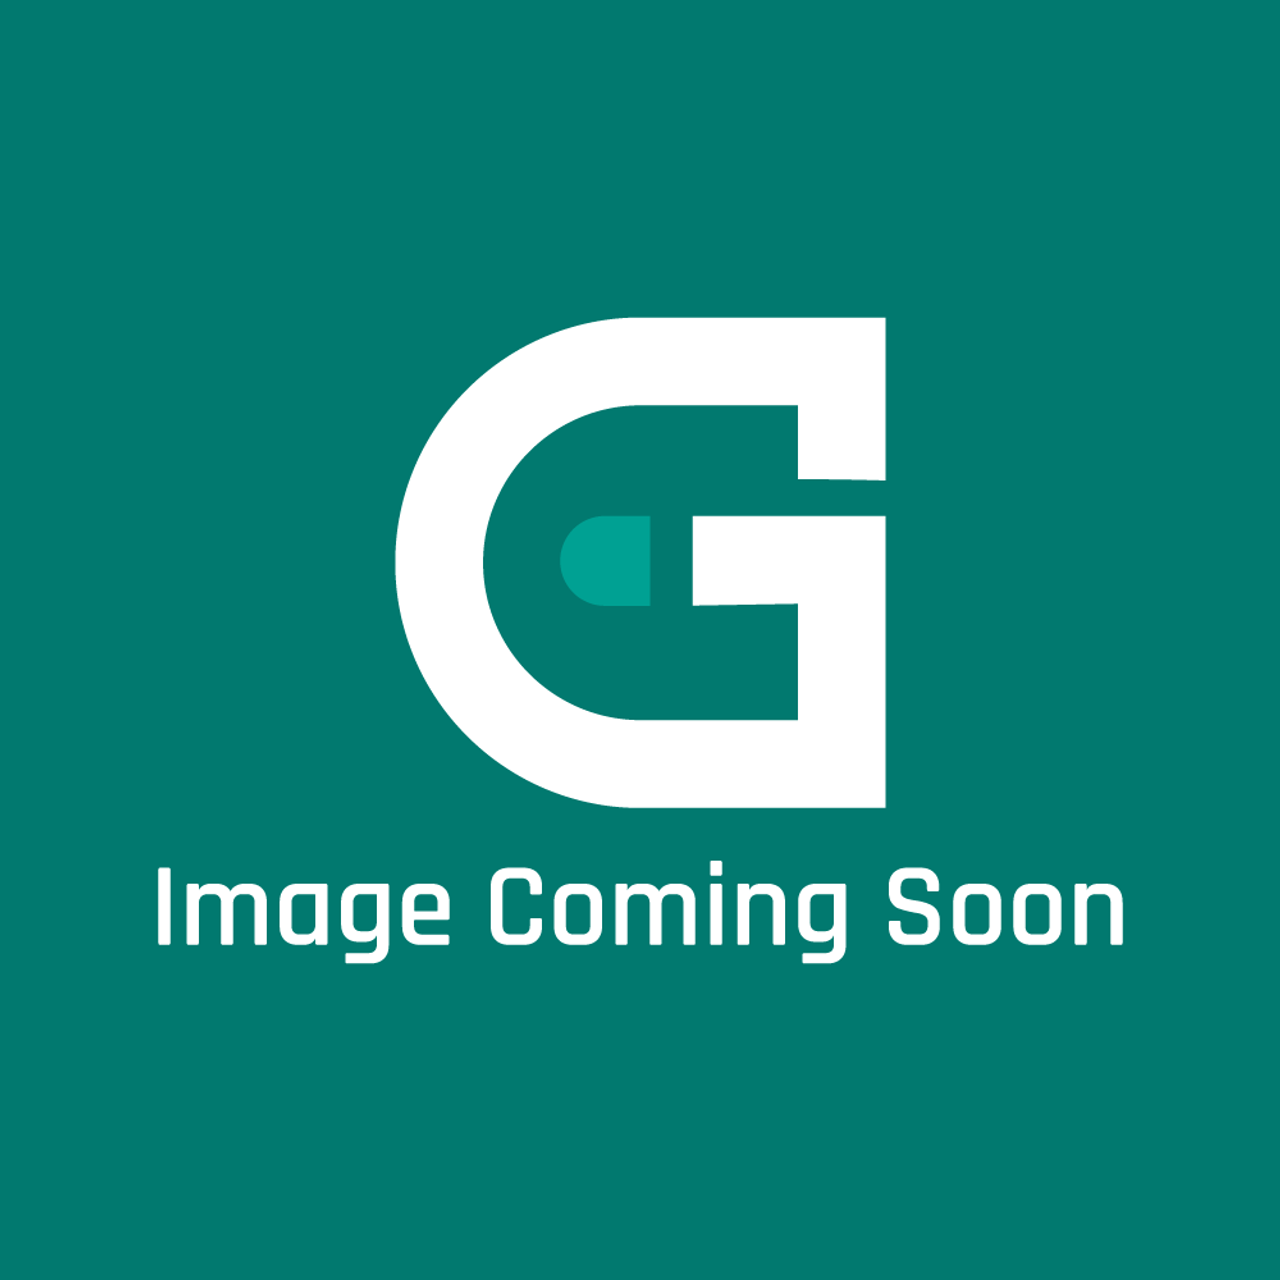 AGA Marvel F1123 - Pin(Cntrlng Restrictor Plt)Rof - Image Coming Soon!